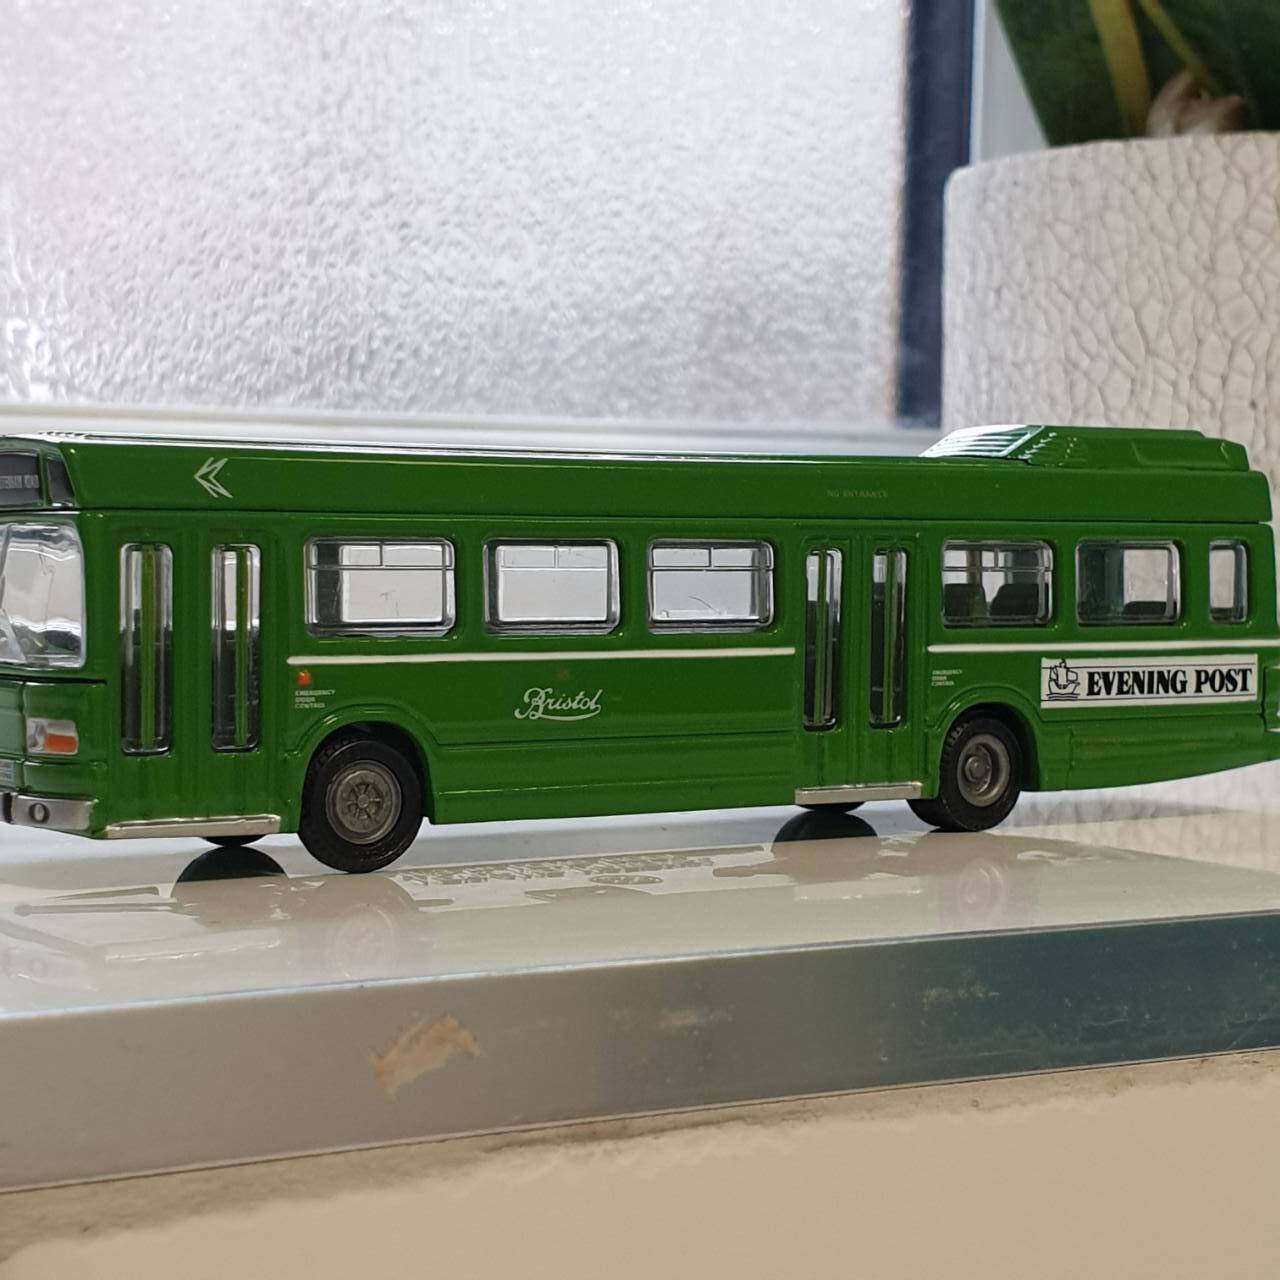 Cookies 45 in 12 month EFE bus challenge + other bus models - 4 